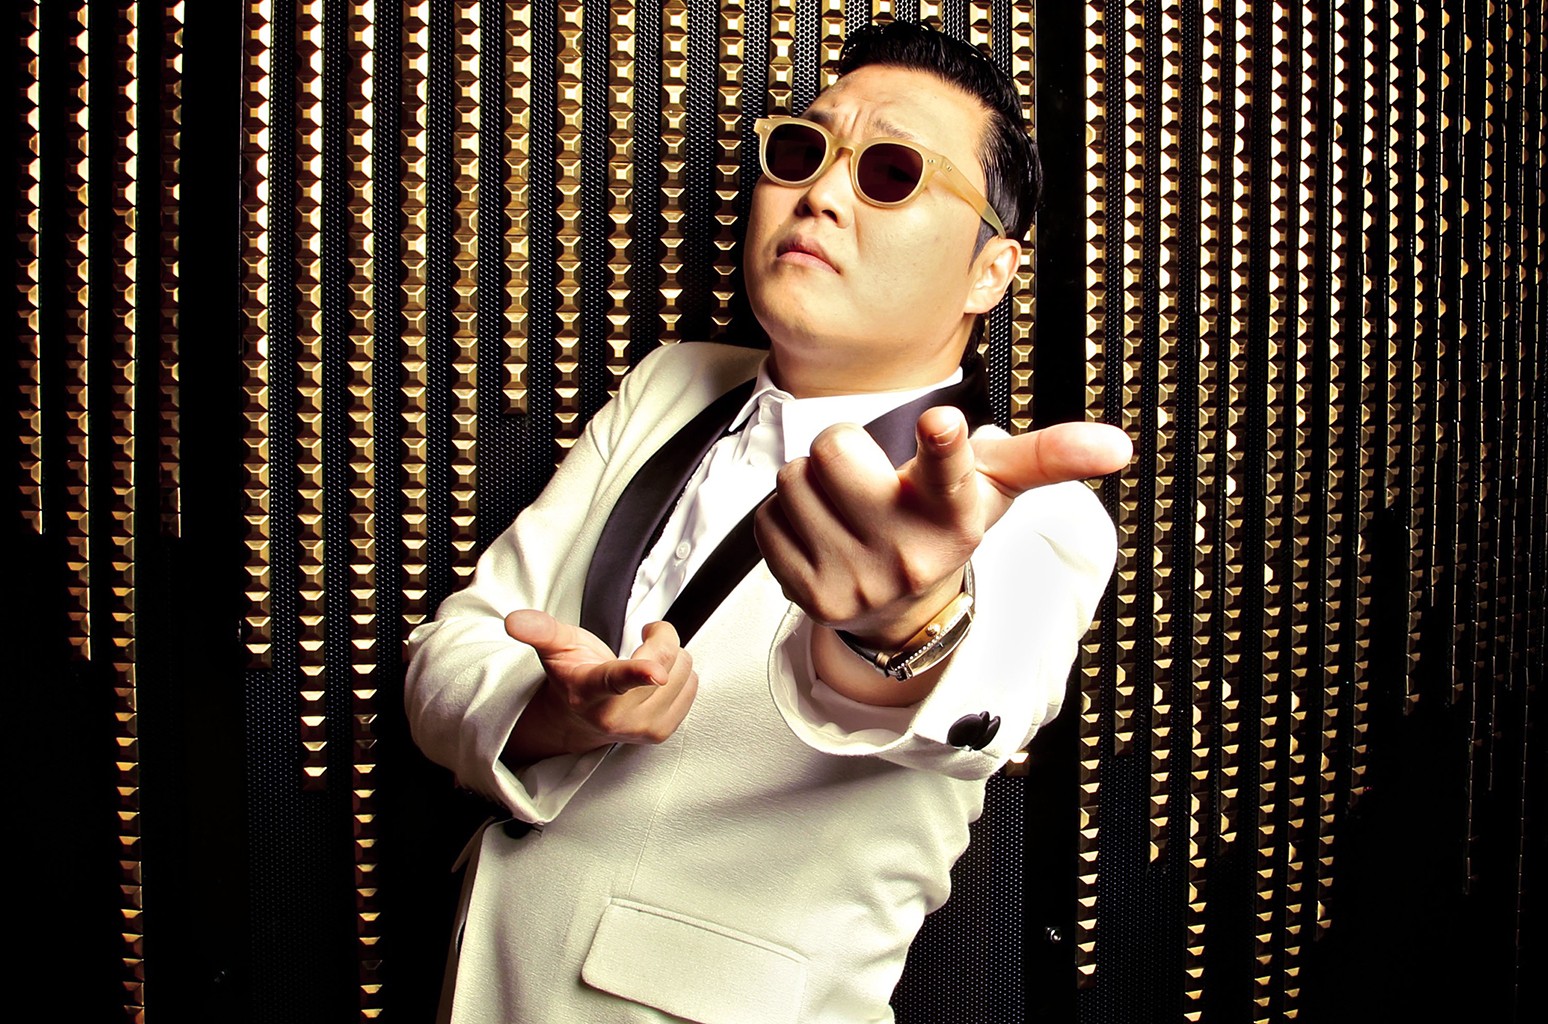 The K-pop industry and some in the wider show business community in South Korea have a problem with drugs. Psy (pictured) was accused of smoking marijuana.